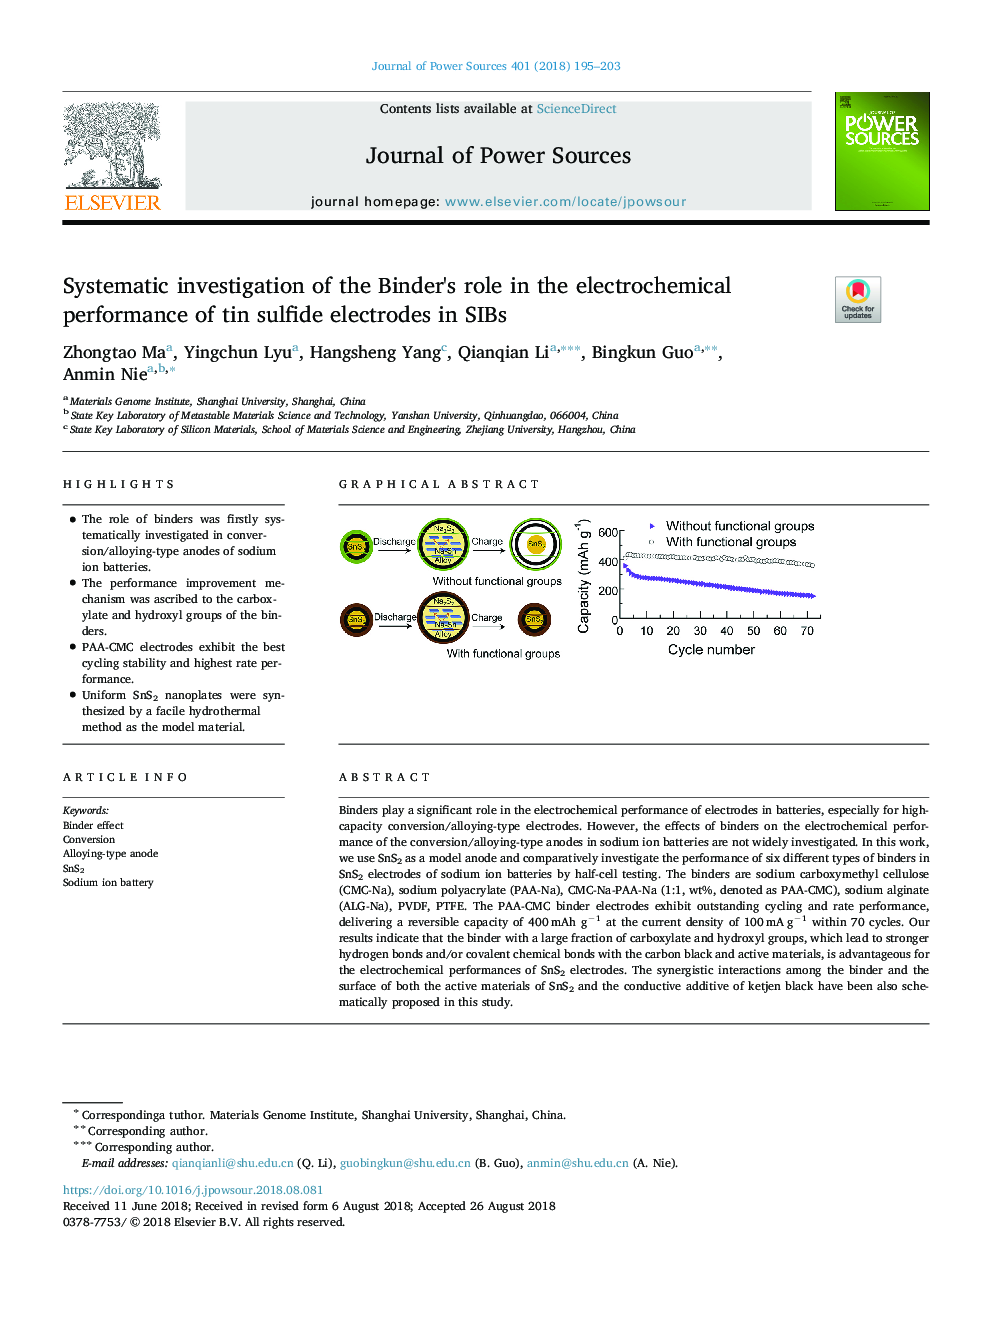 Systematic investigation of the Binder's role in the electrochemical performance of tin sulfide electrodes in SIBs